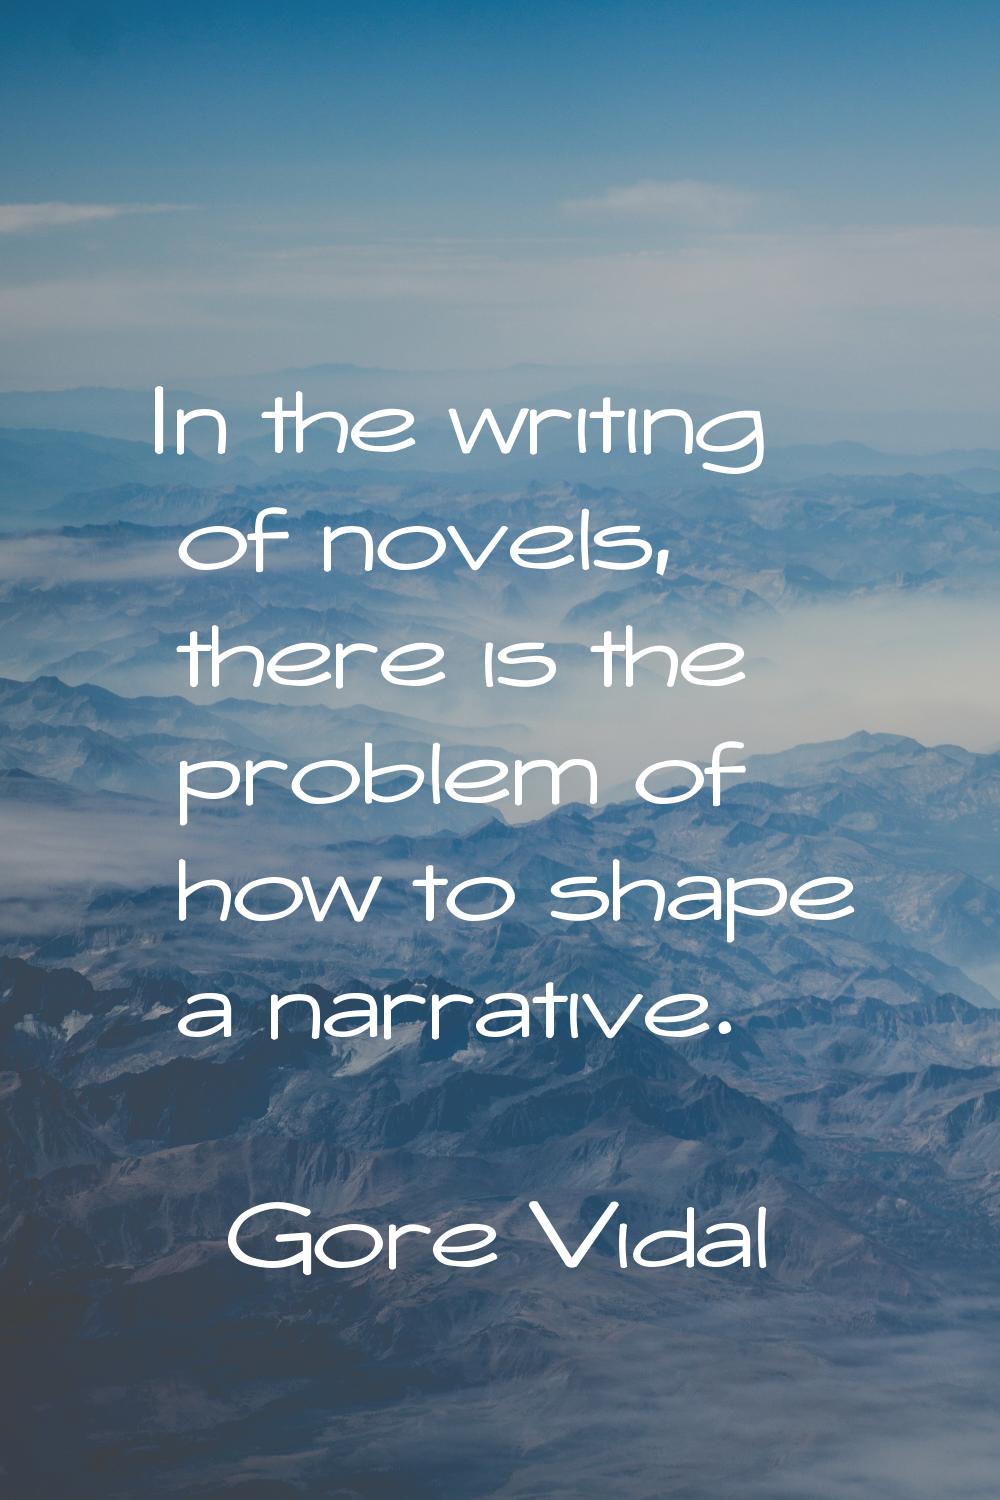 In the writing of novels, there is the problem of how to shape a narrative.